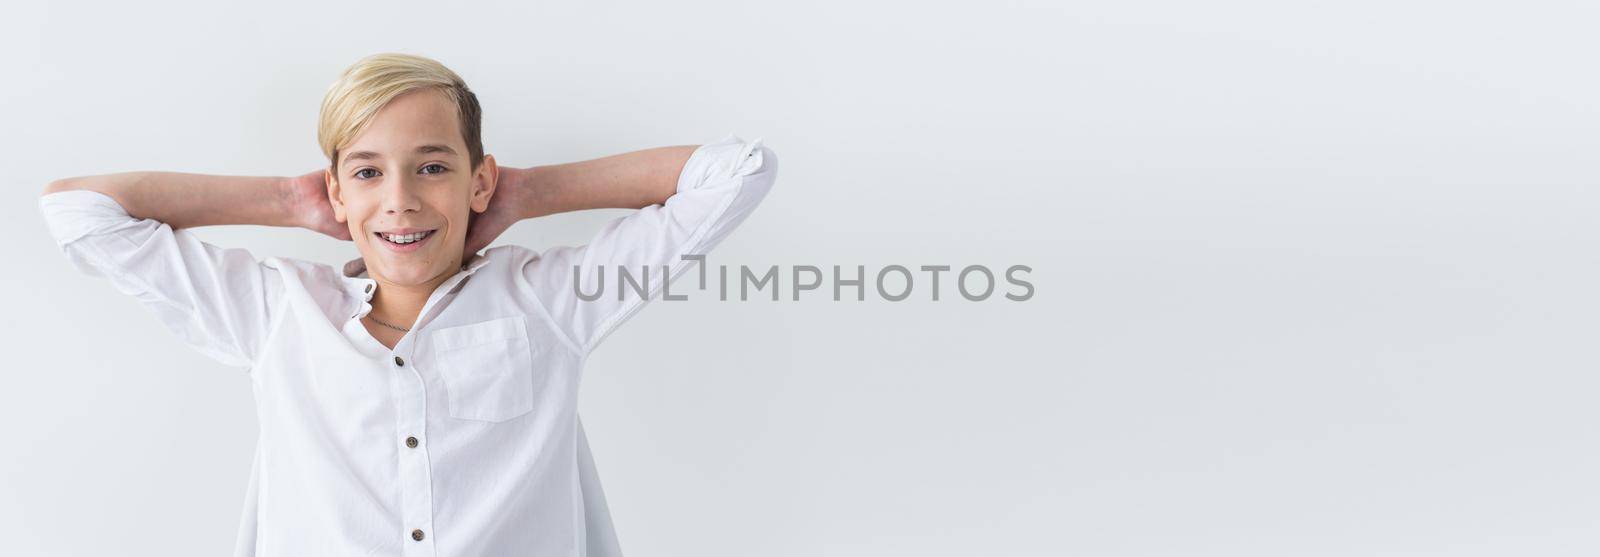 Teen boy happy and smiling with braces on teeth - ortodont dentistry and dental health on white background with copy space banner place for advertising